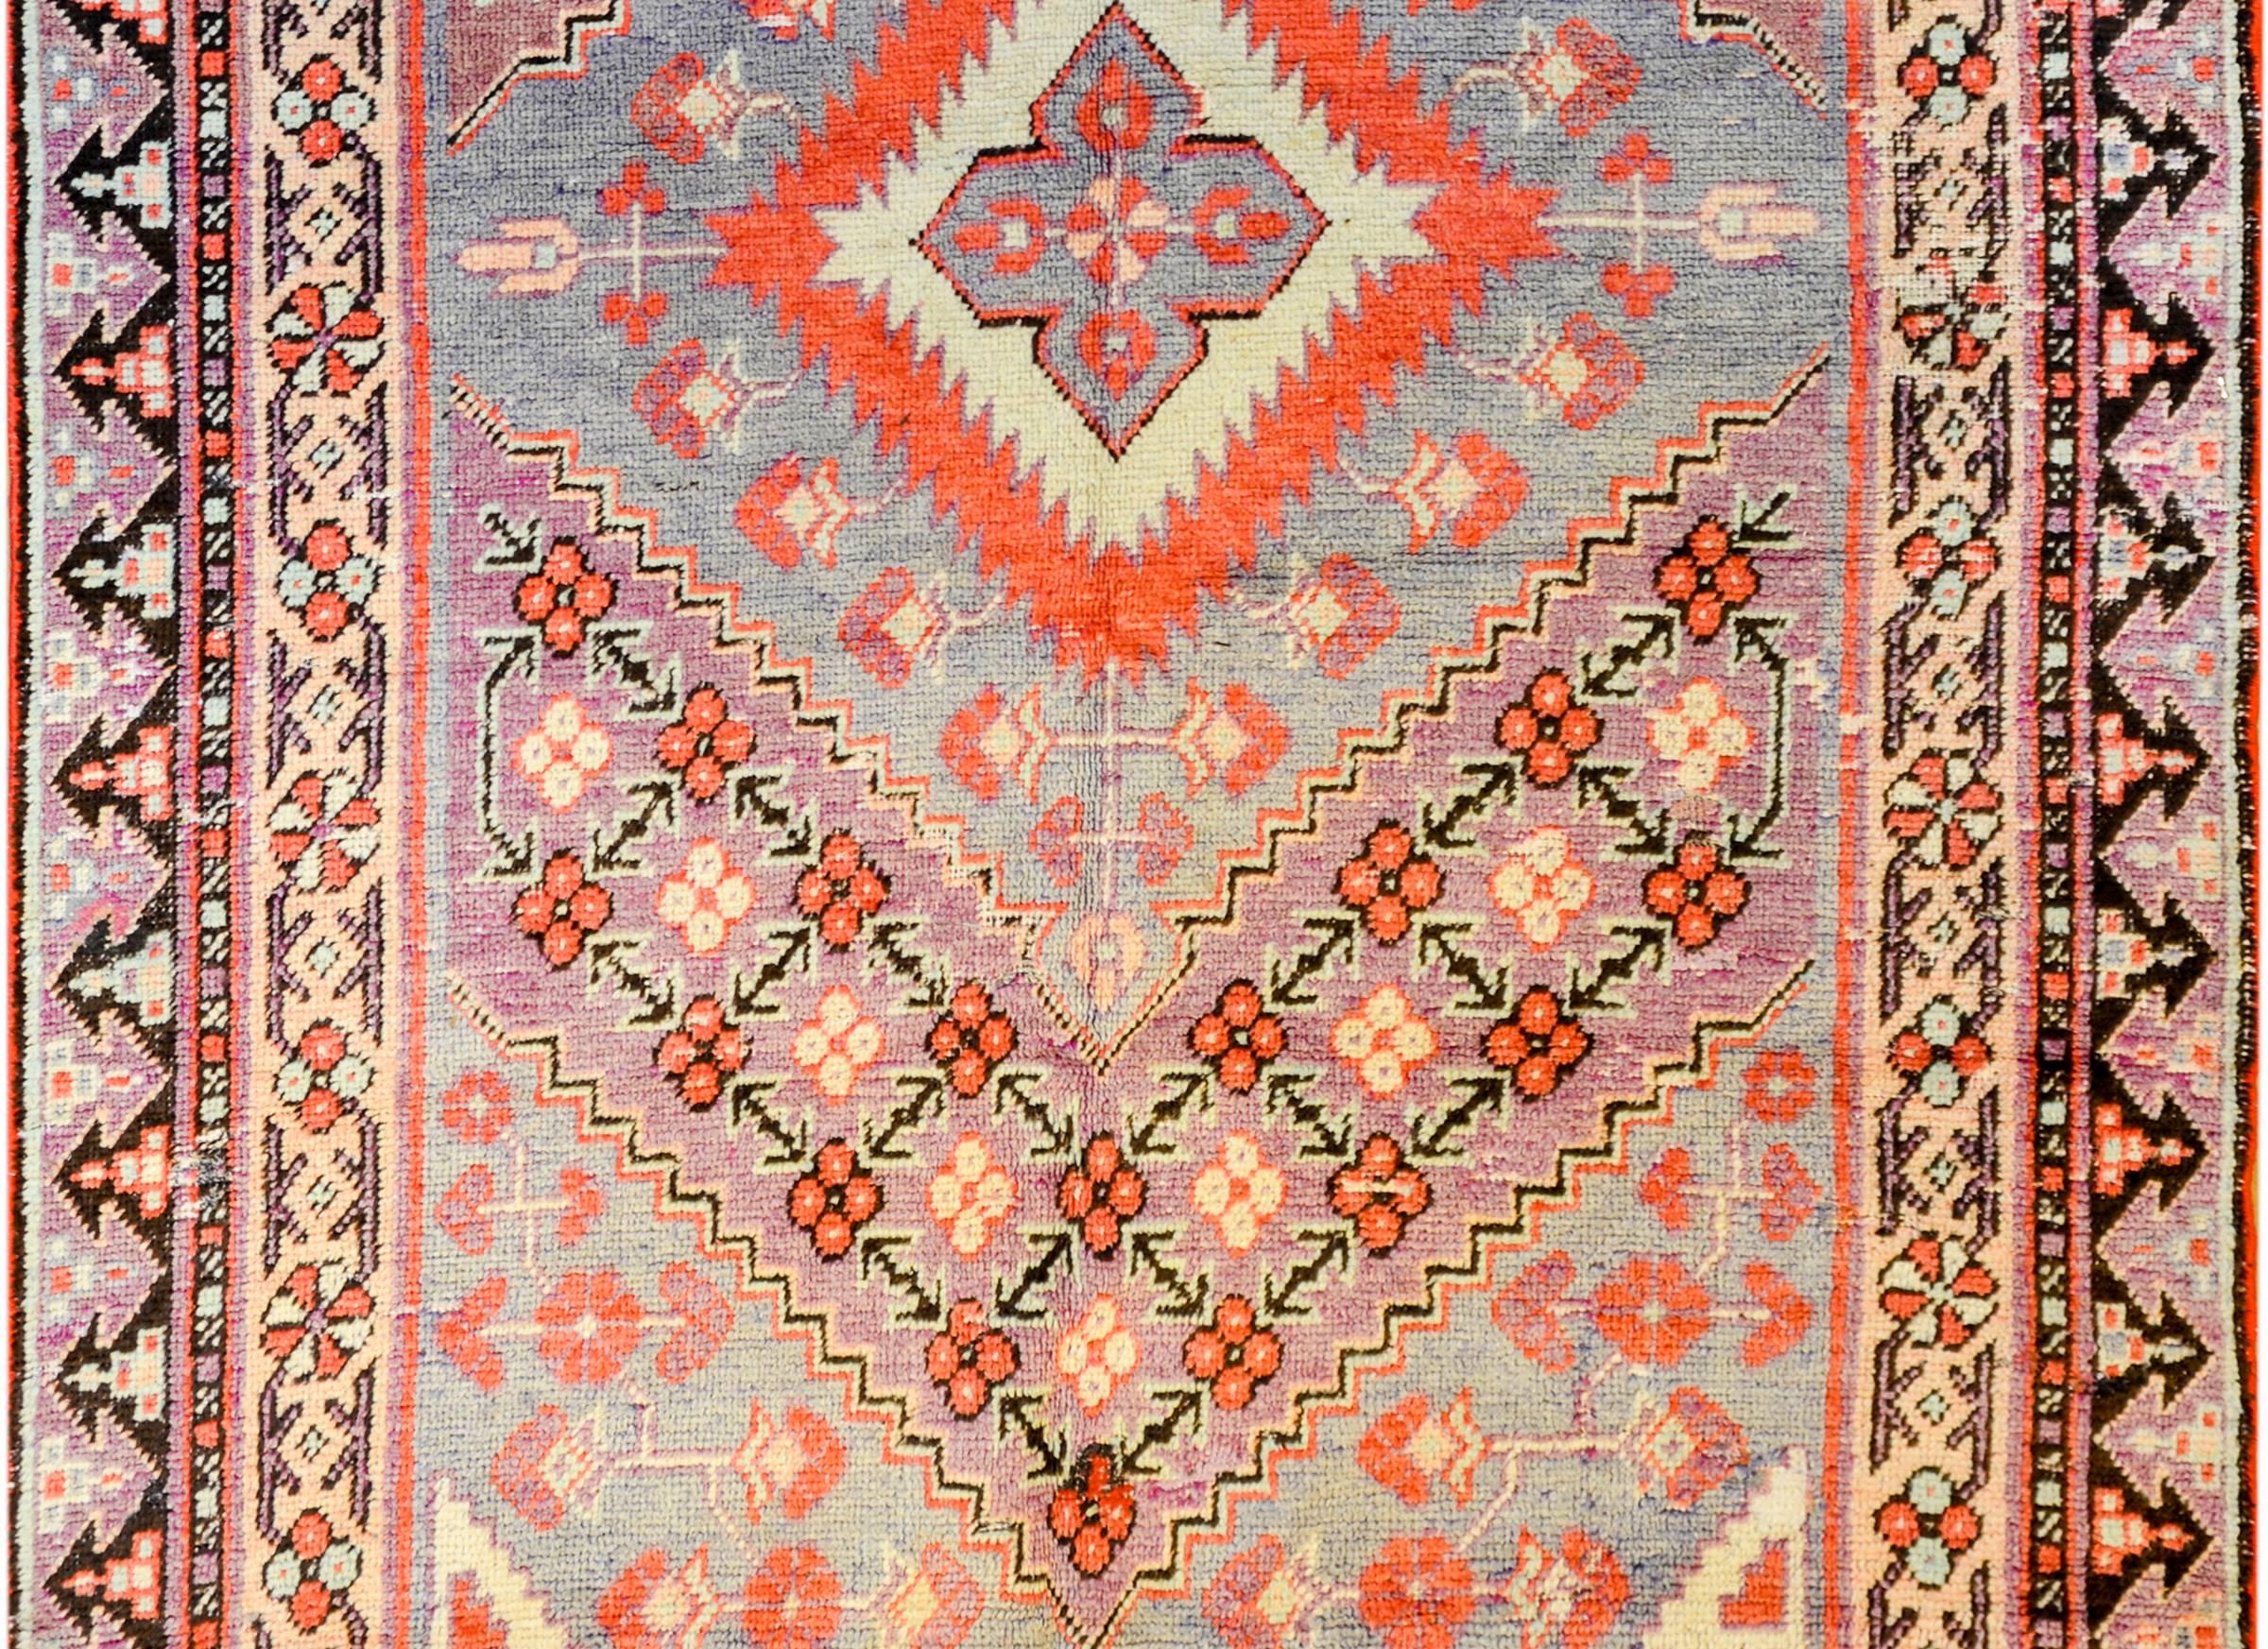 An early 20th century Central Asian Samarkand rug with large diamond and floral medallion, amidst a field of flowers, surrounded by a complementary floral border, all woven in crimson, lavender, indigo, and gold vegetable dyed colored wool.